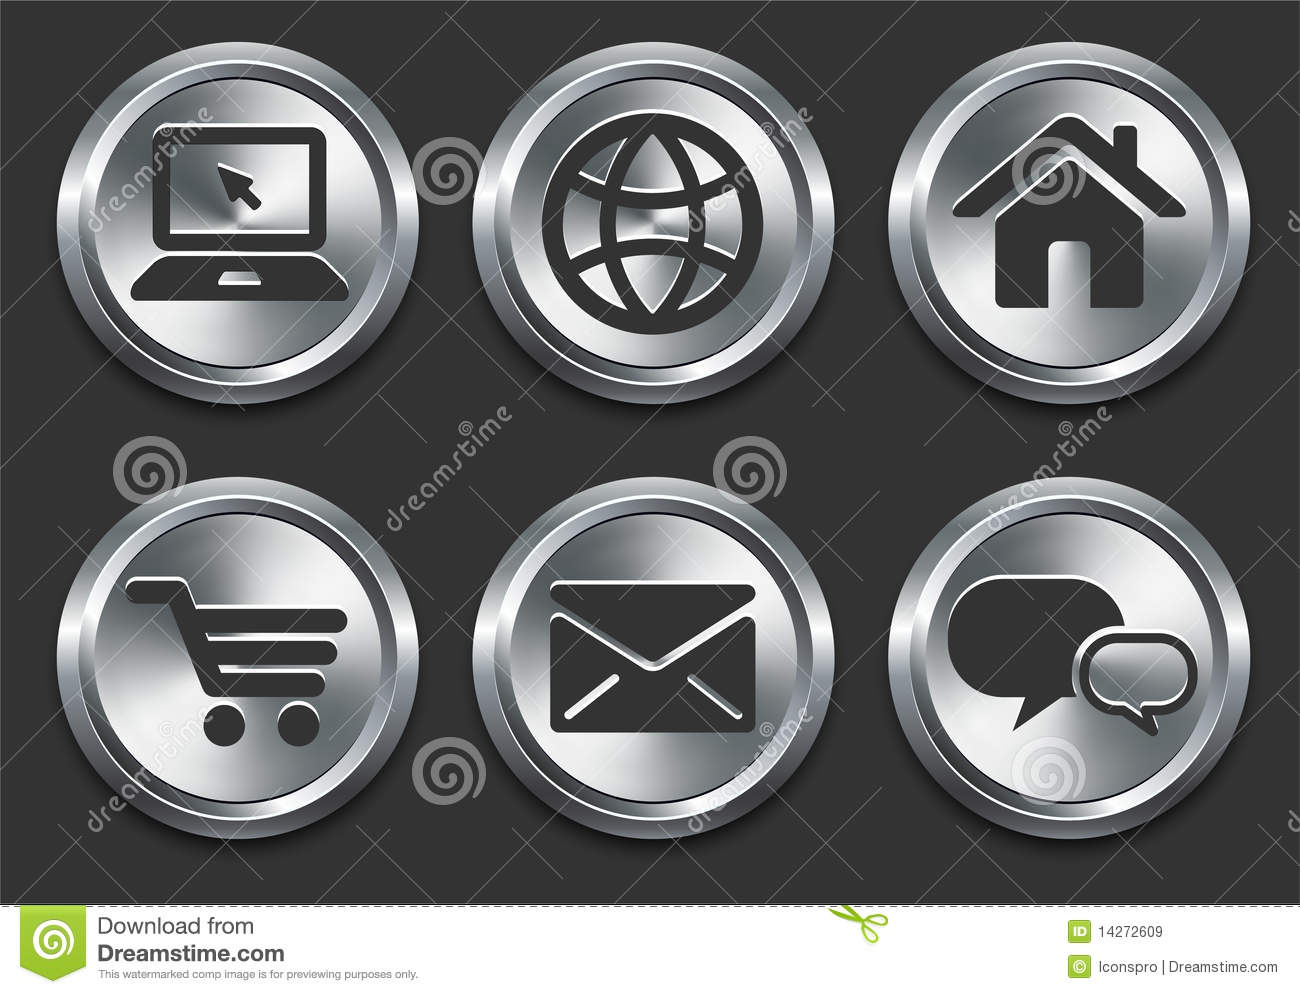 Computer Button Icons Free